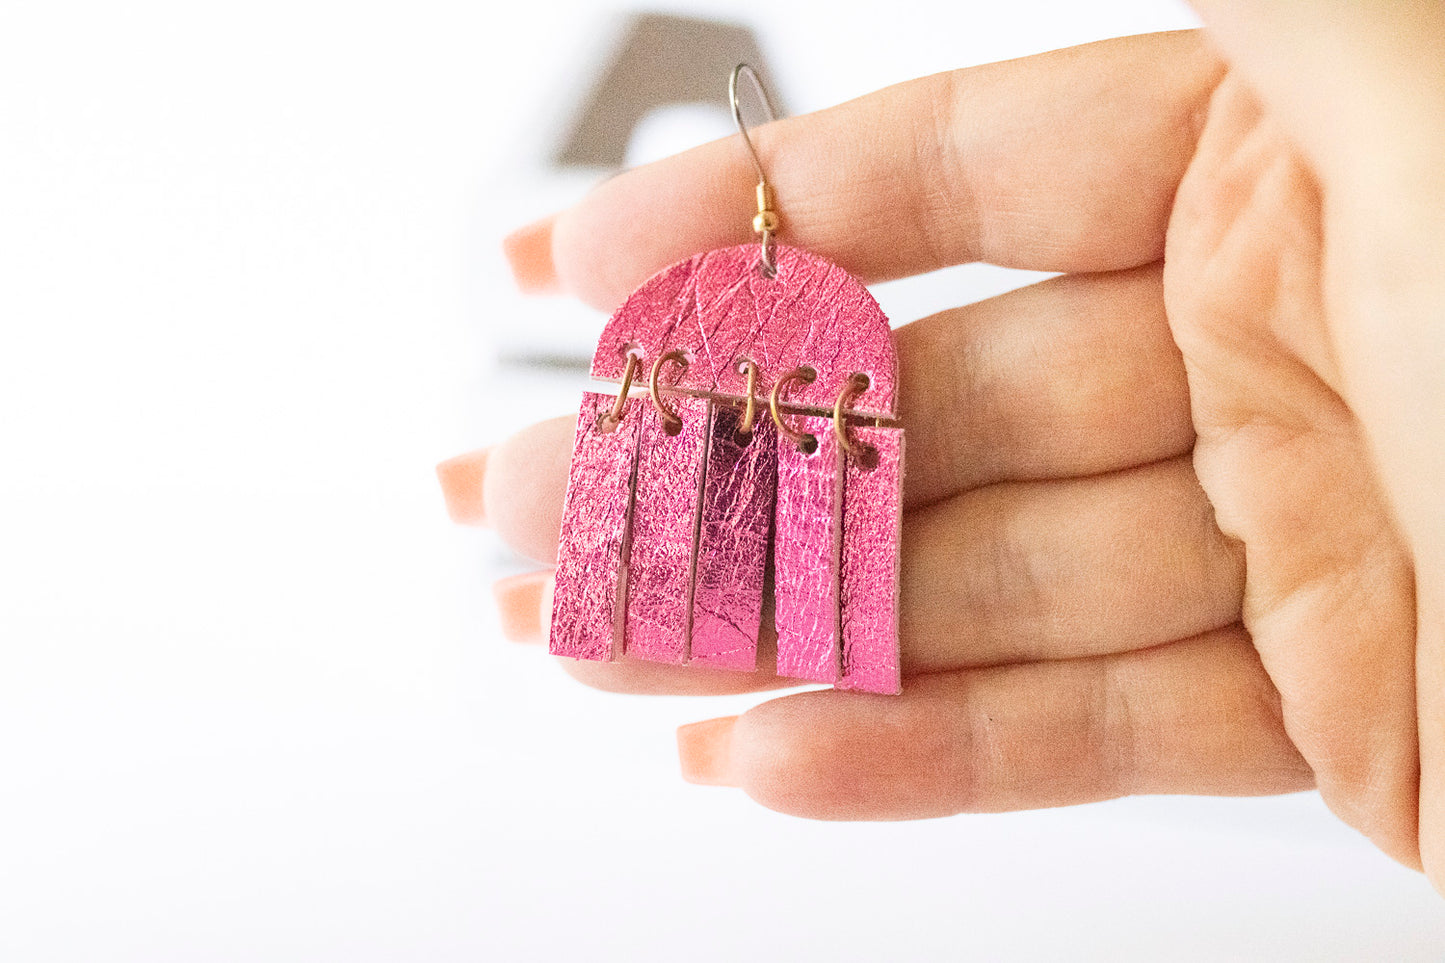 Leather Earrings / Cinque Luci / Metallic Hot Pink